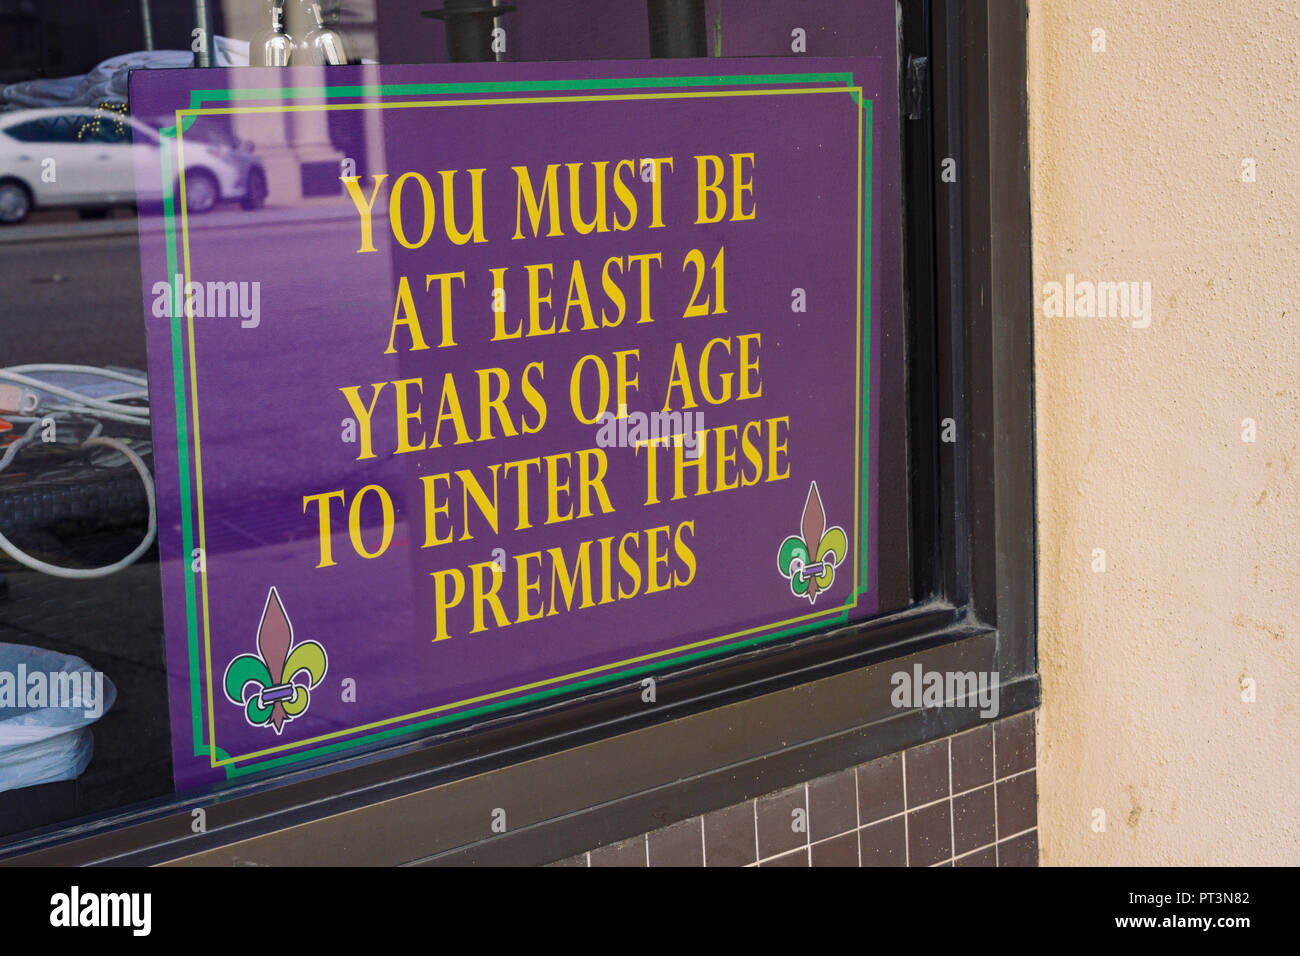 Minimum age restriction sign for drinking alcohol or alcoholic beverages in the window of a bar or tavern in downtown Montgomery Alabama, USA. Stock Photo